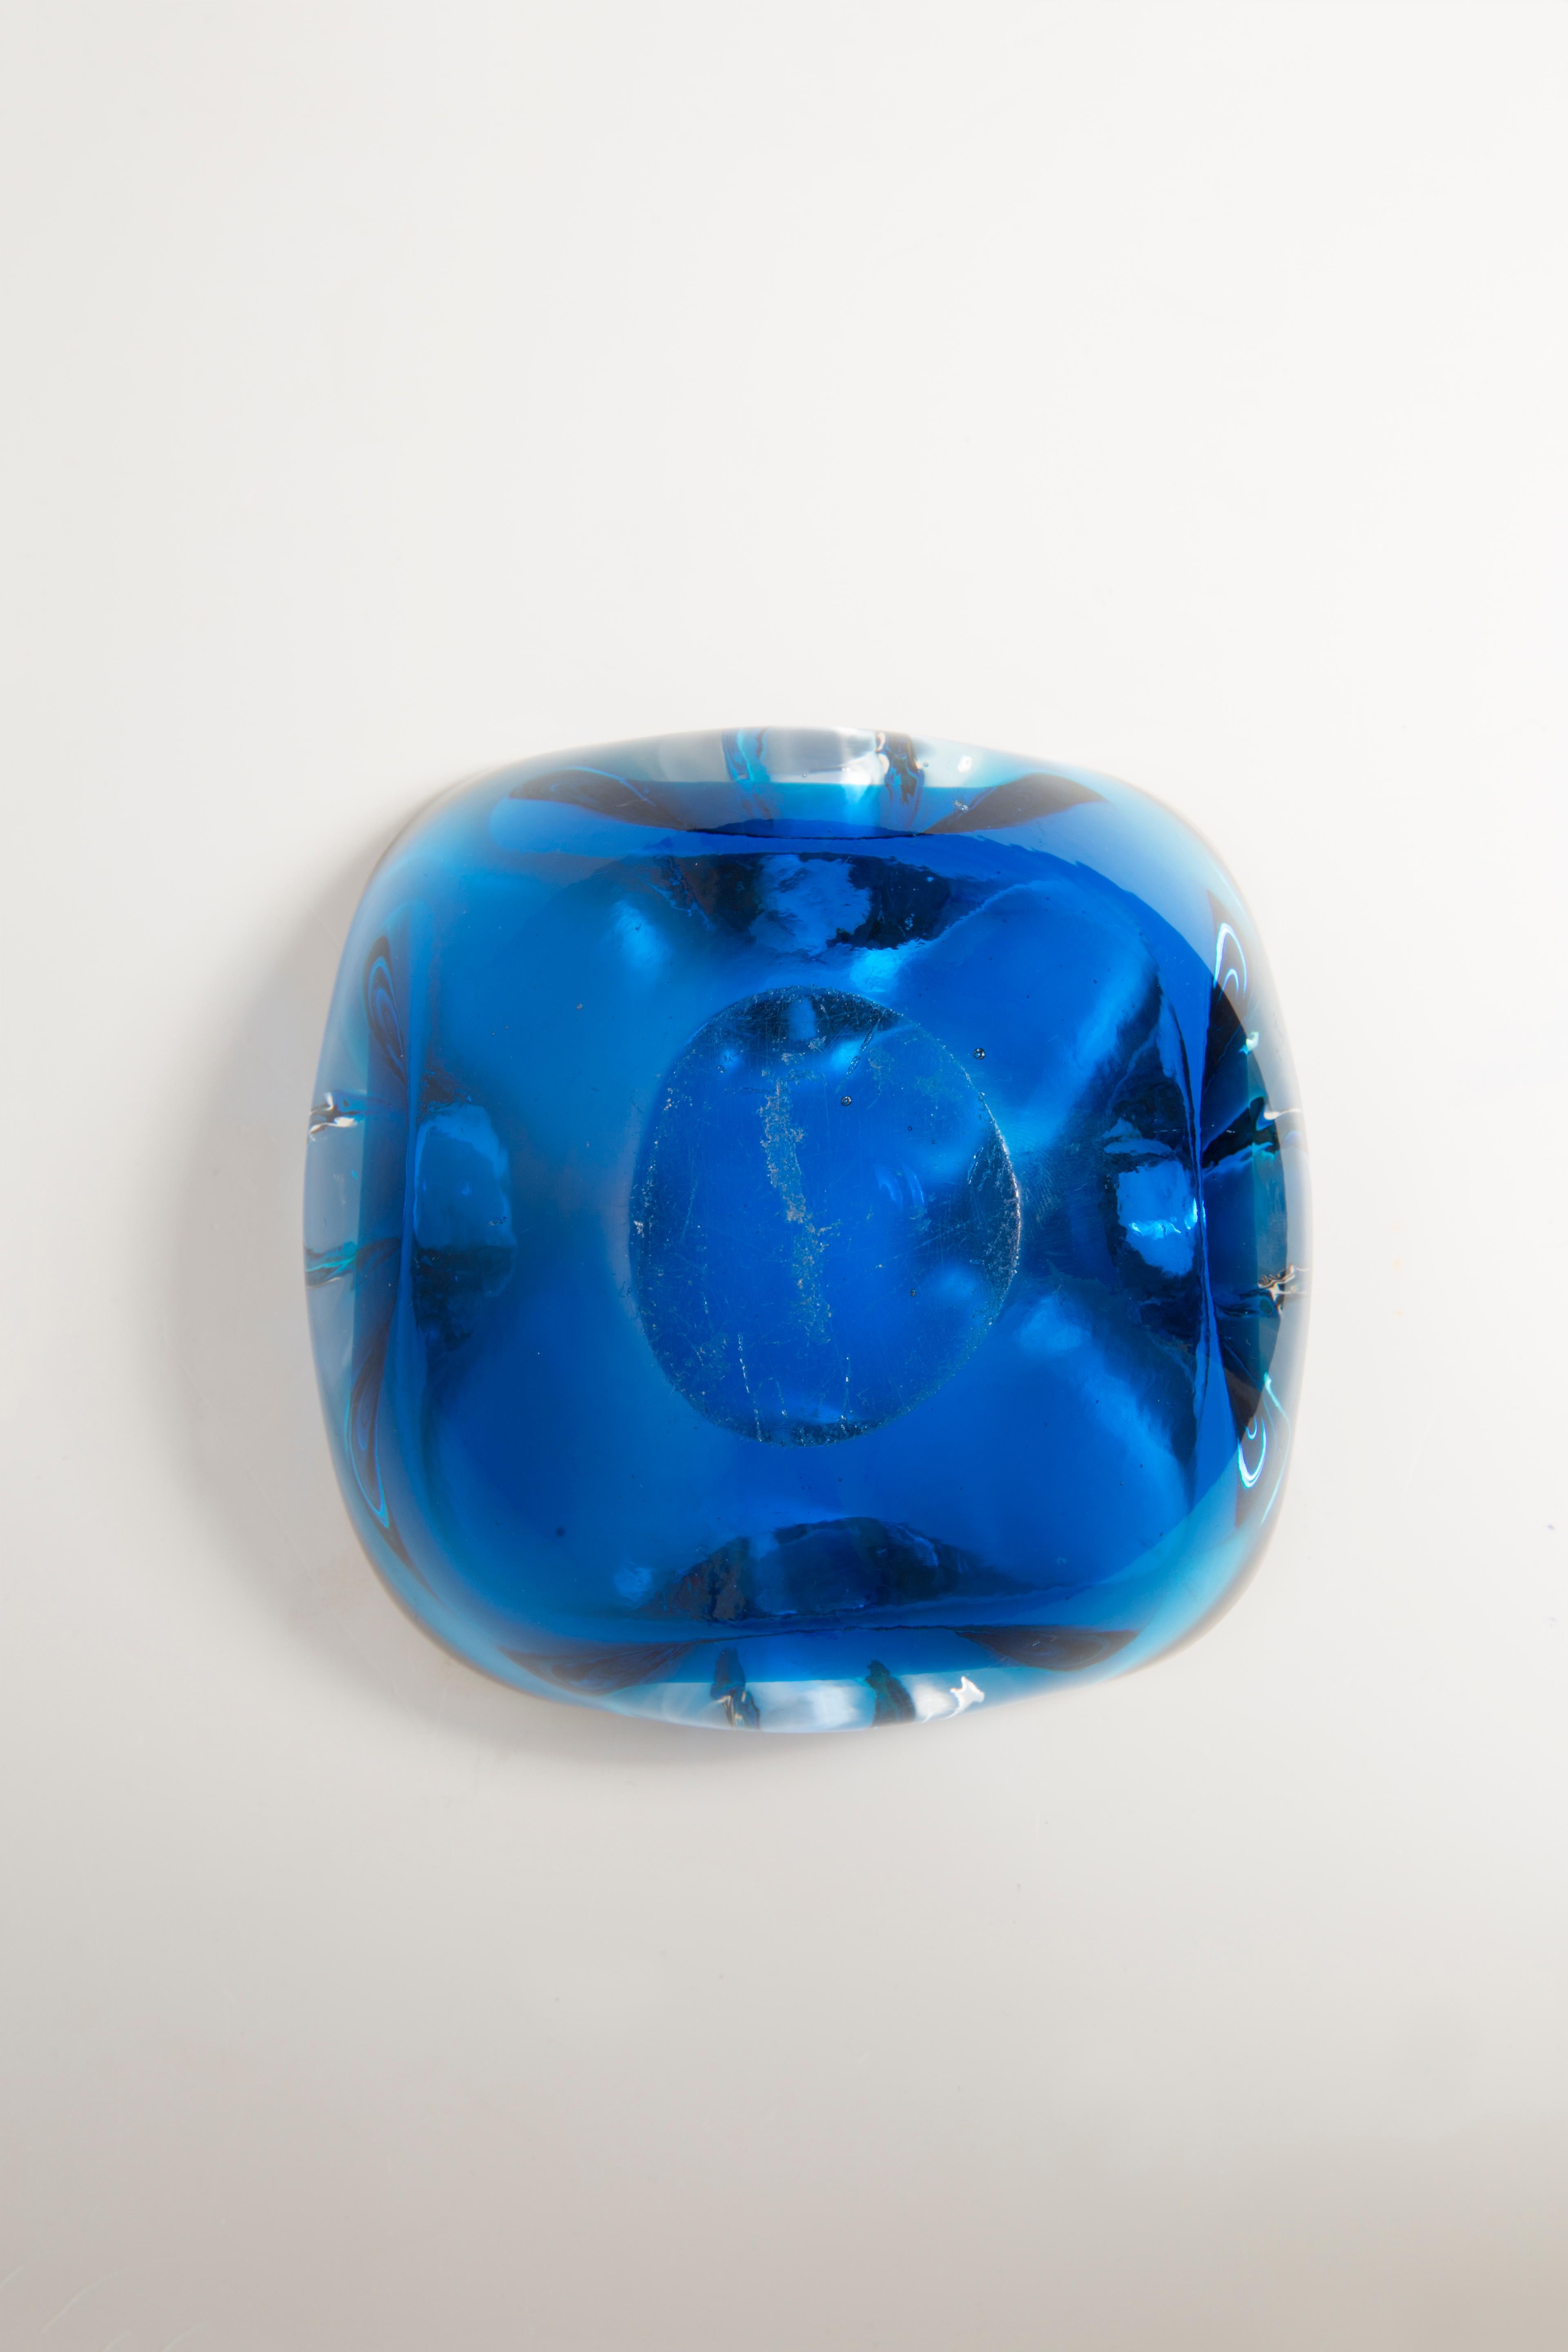 Mid Century Murano Blue Glass Bowl Ashtray Element, Italy, 1970s For Sale 2